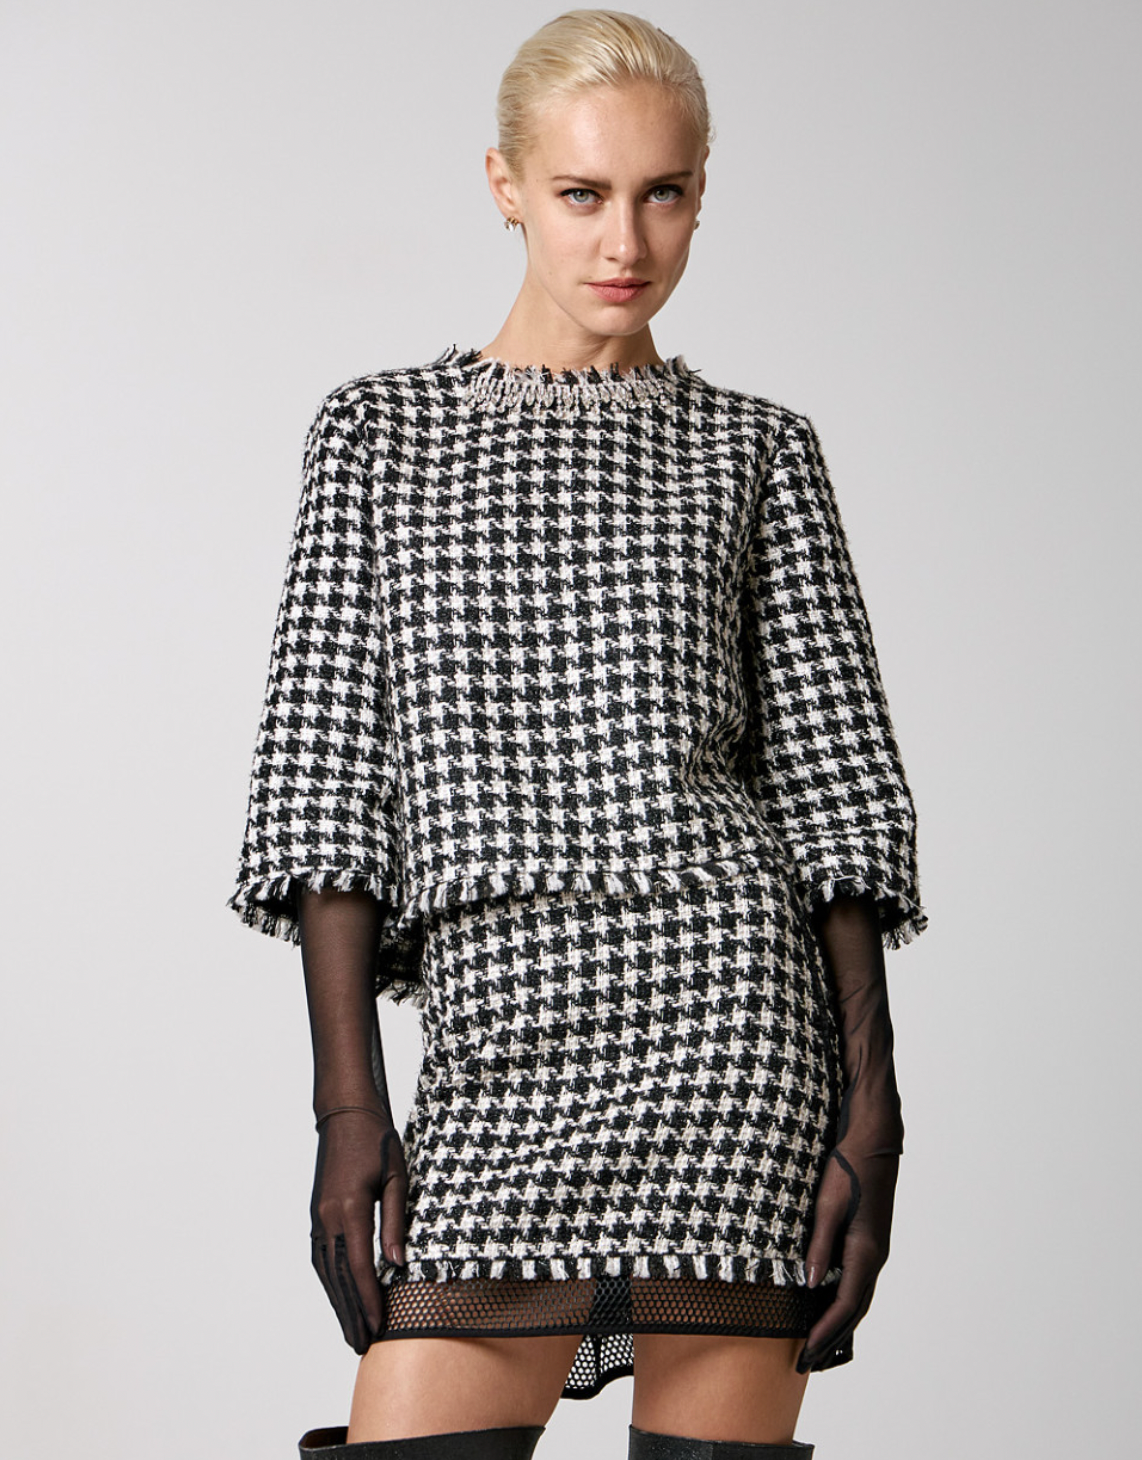 Access Fashion Tweed Cropped Houndstooth Blouse, 34-2019